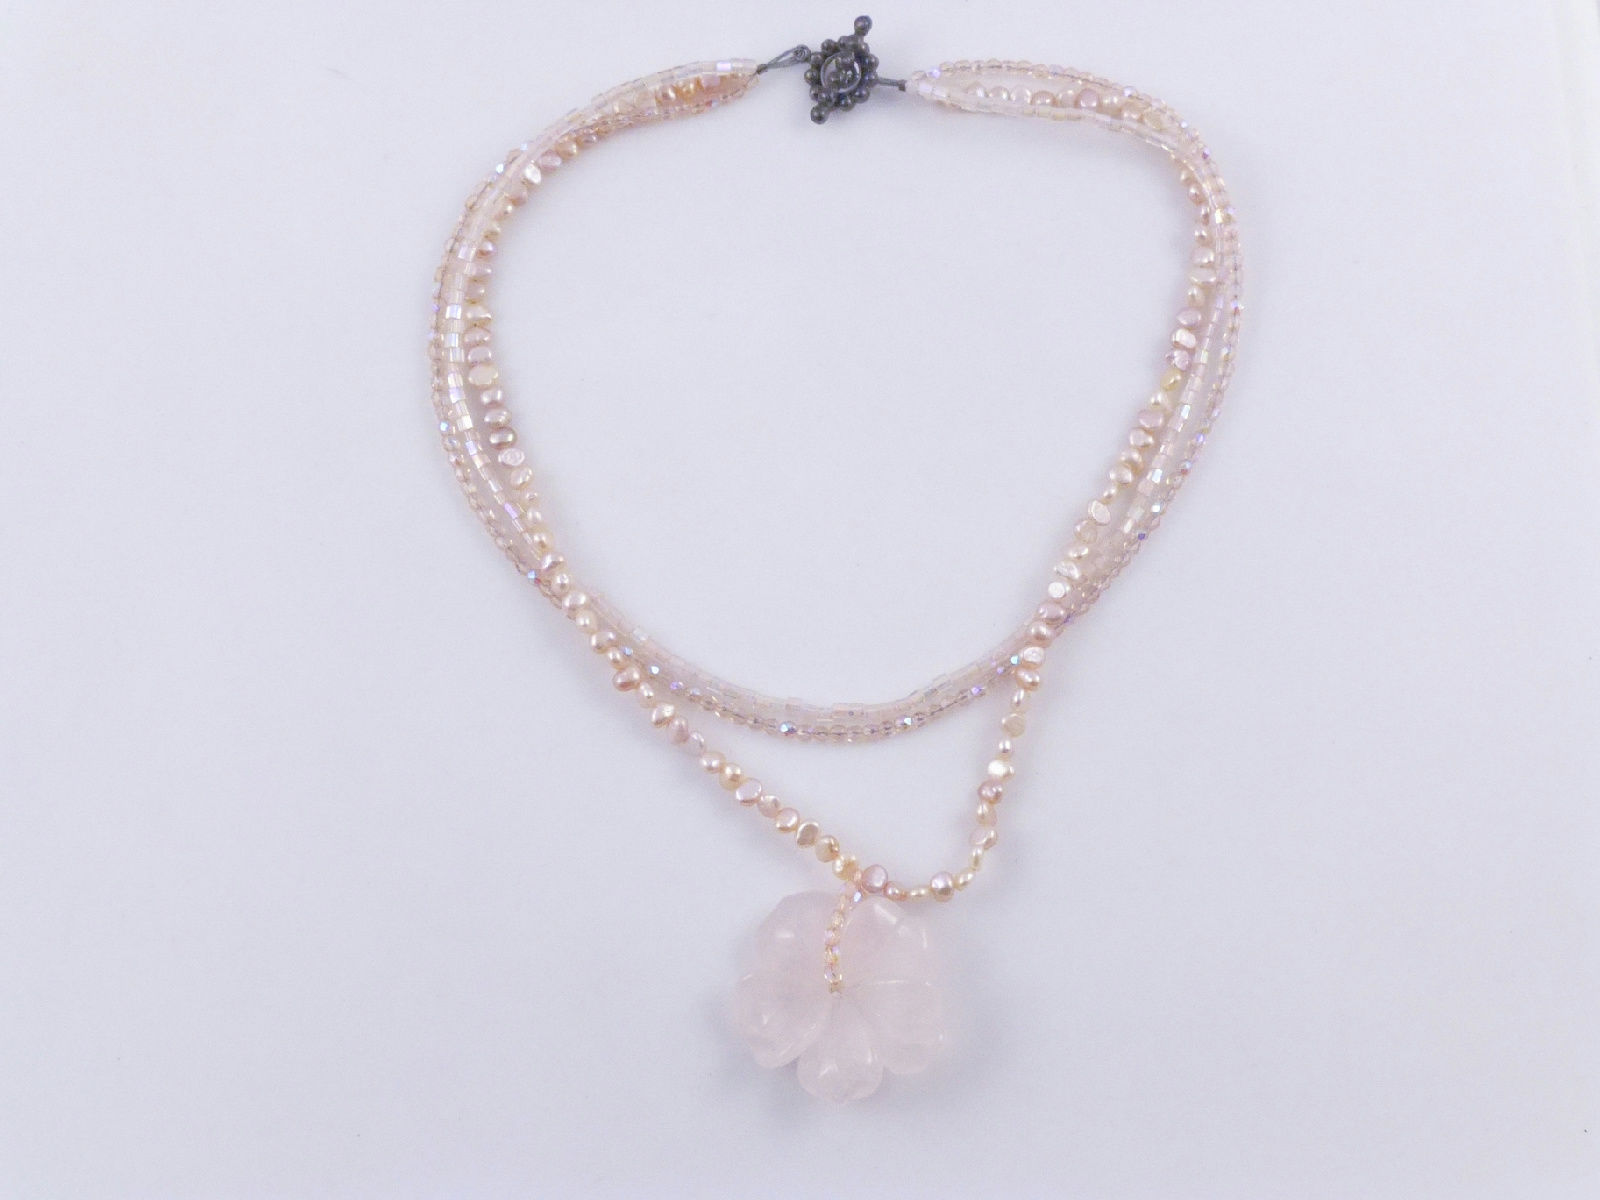 ROSE QUARTZ Flower Pendant on Pearl and Glass Beaded Necklace - Sterling Silver - $55.00